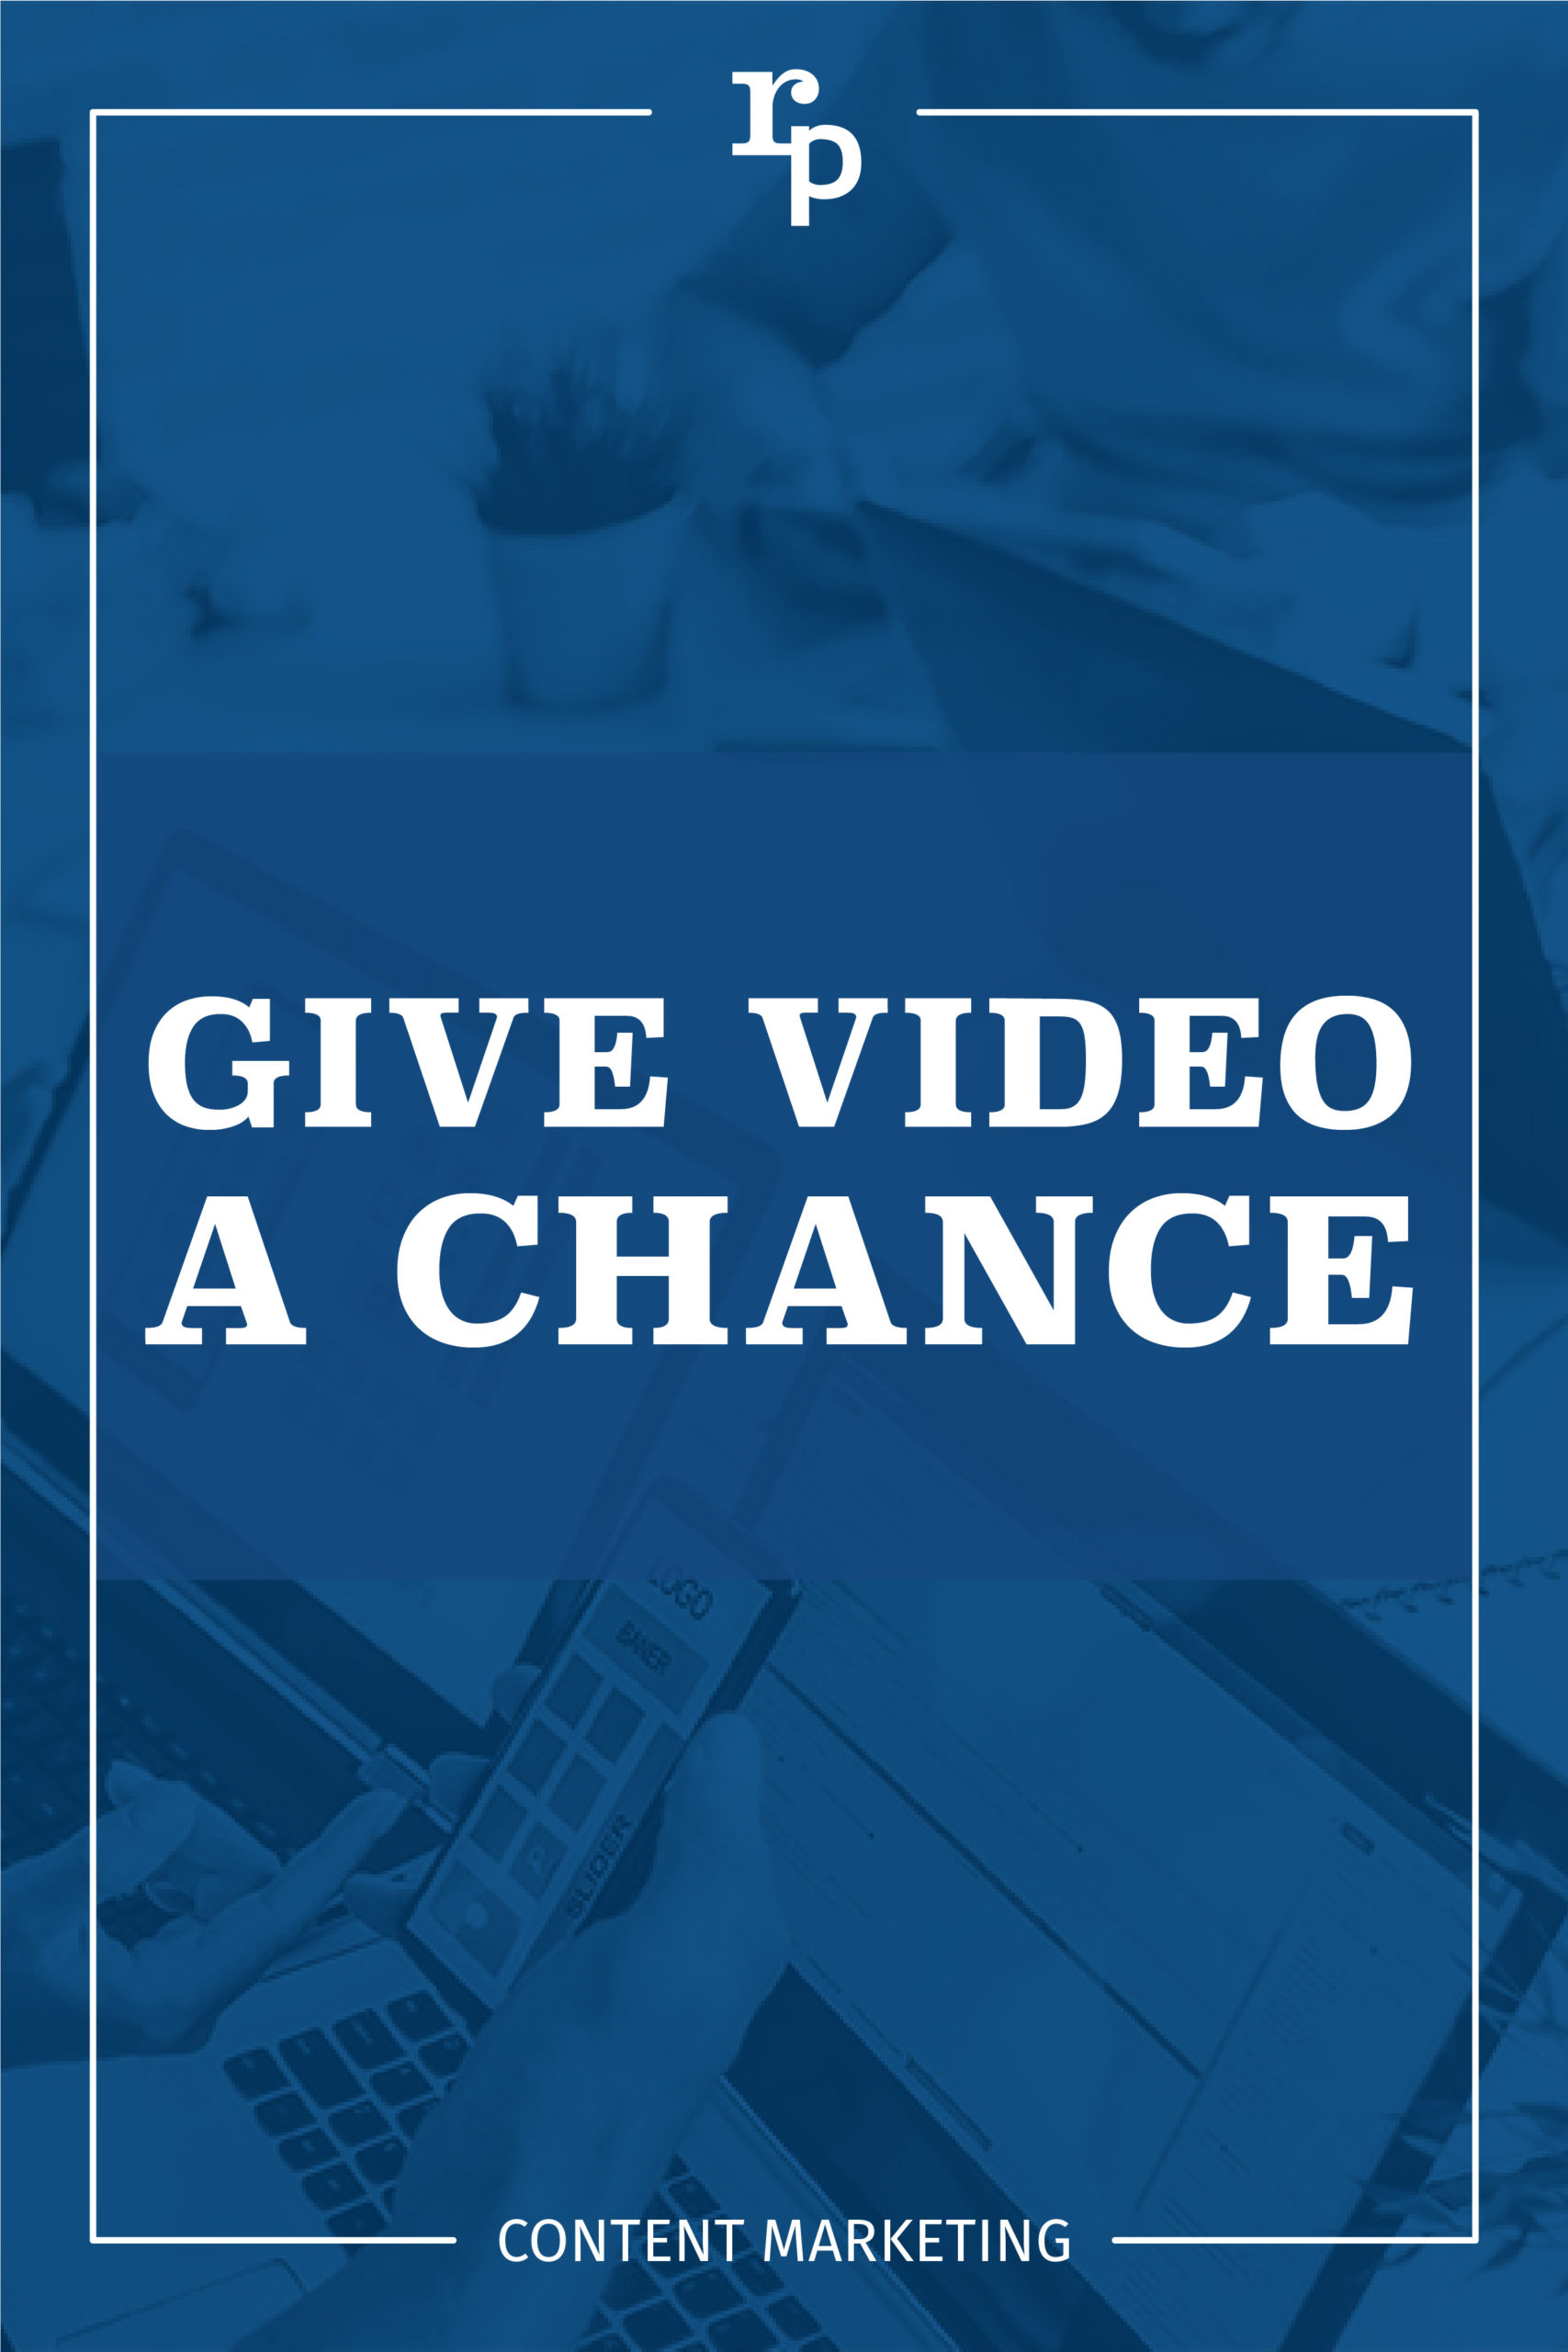 give video a chance content1 pin blue scaled